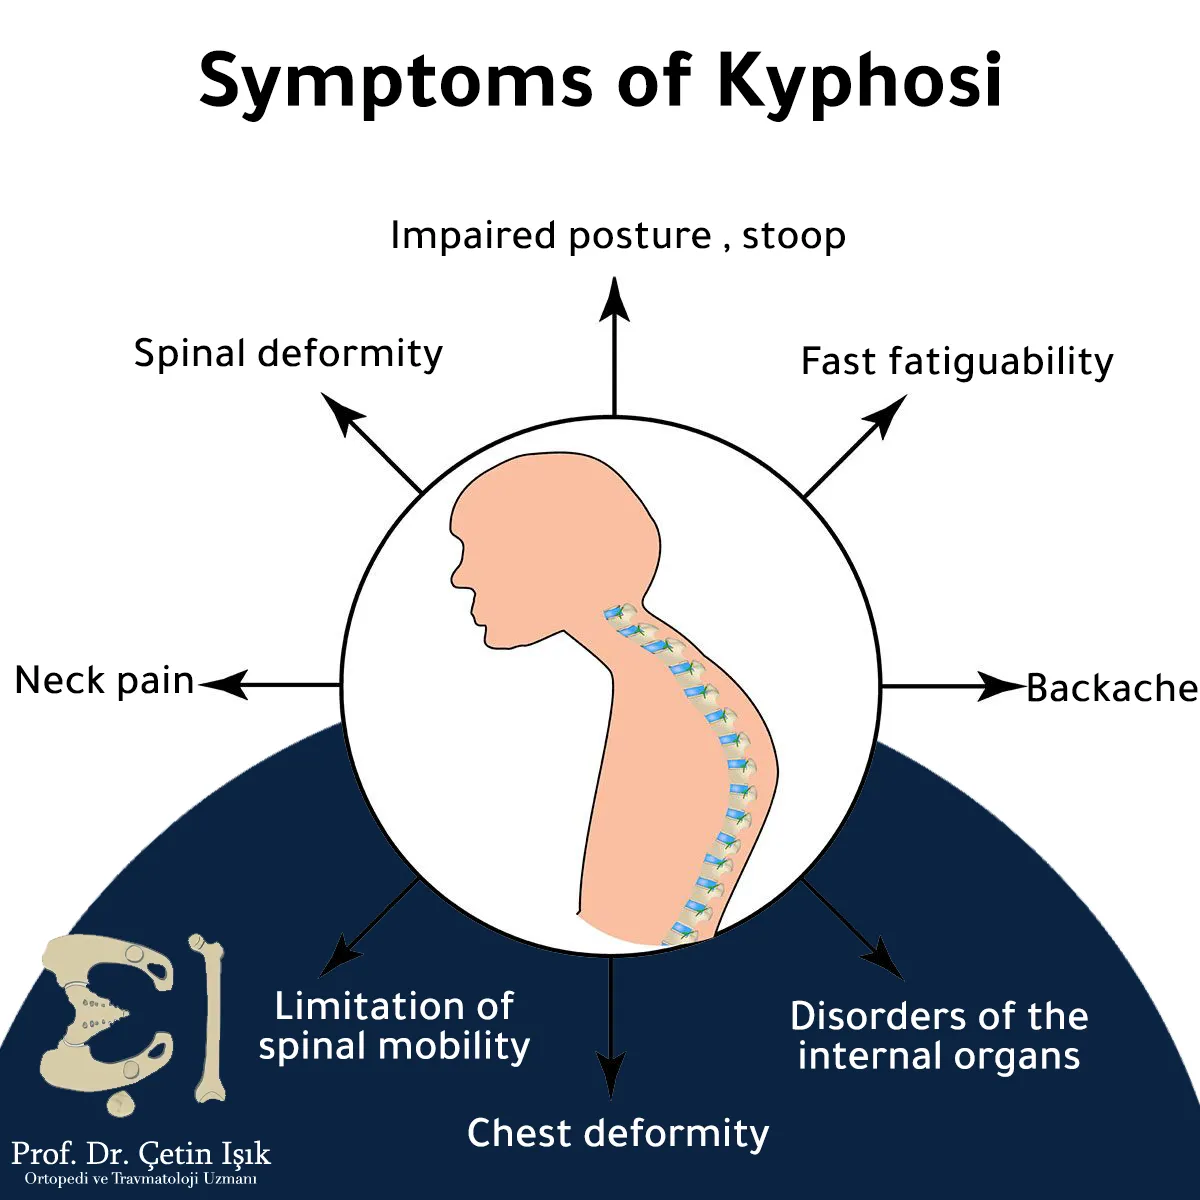 the symptoms of kyphosis such as fatigue, neck and back pain, deformation of the spine, limiting its movement, and disturbances in the internal organs.